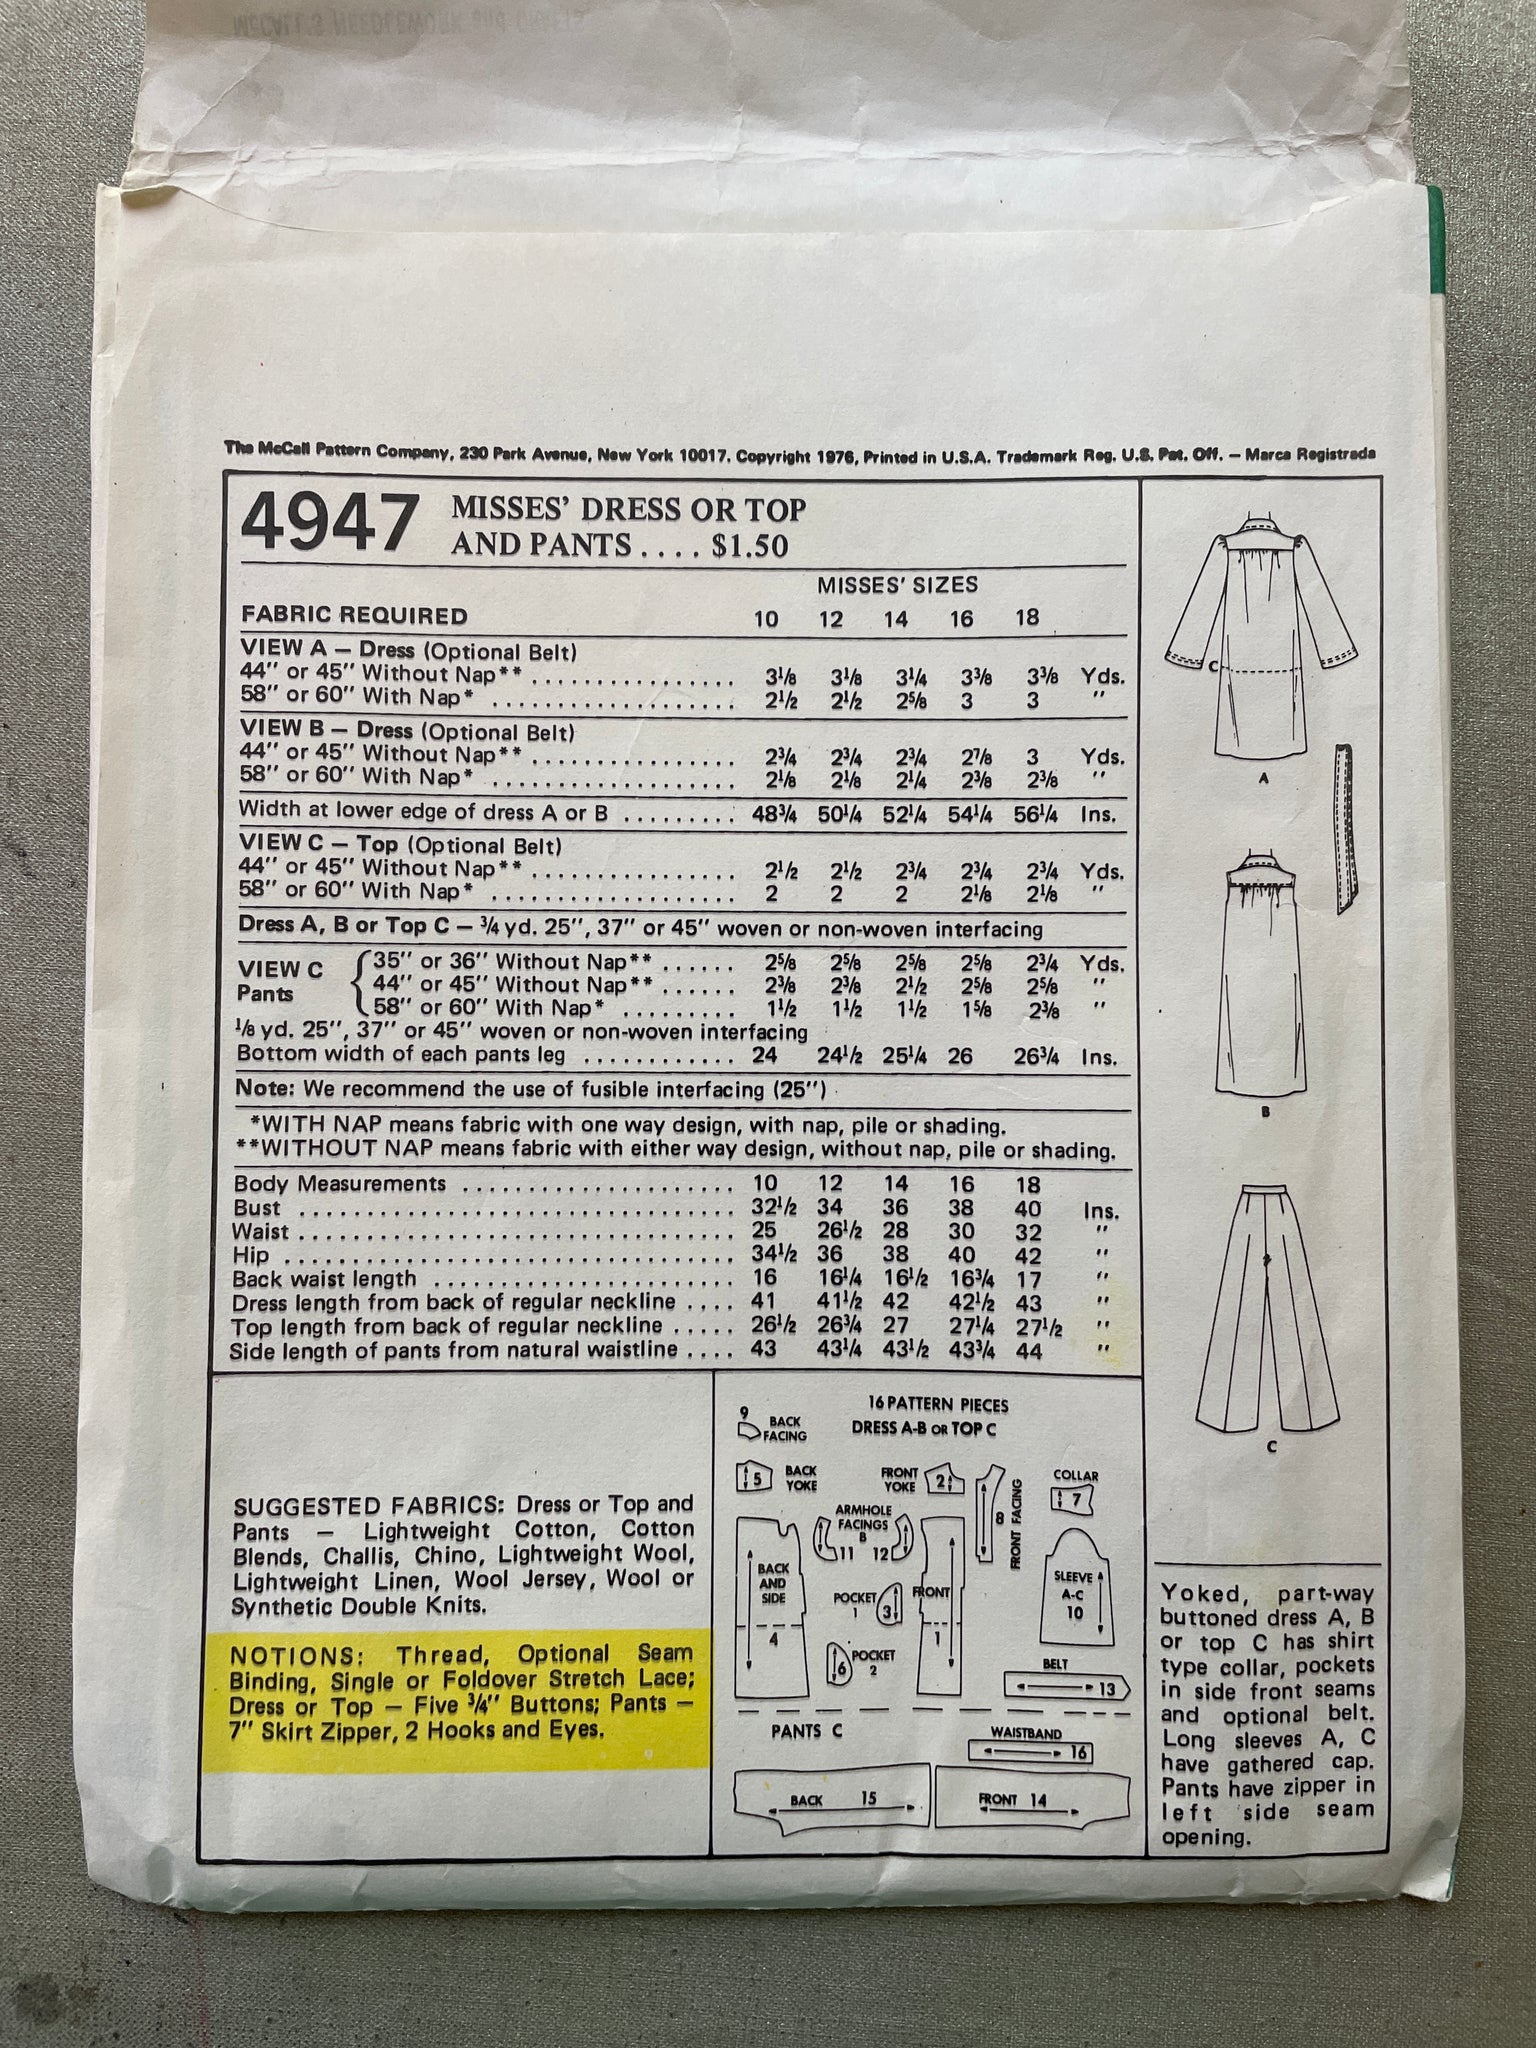 SALE 1976 McCall's 4947 Pattern - Dress or Top and Pants